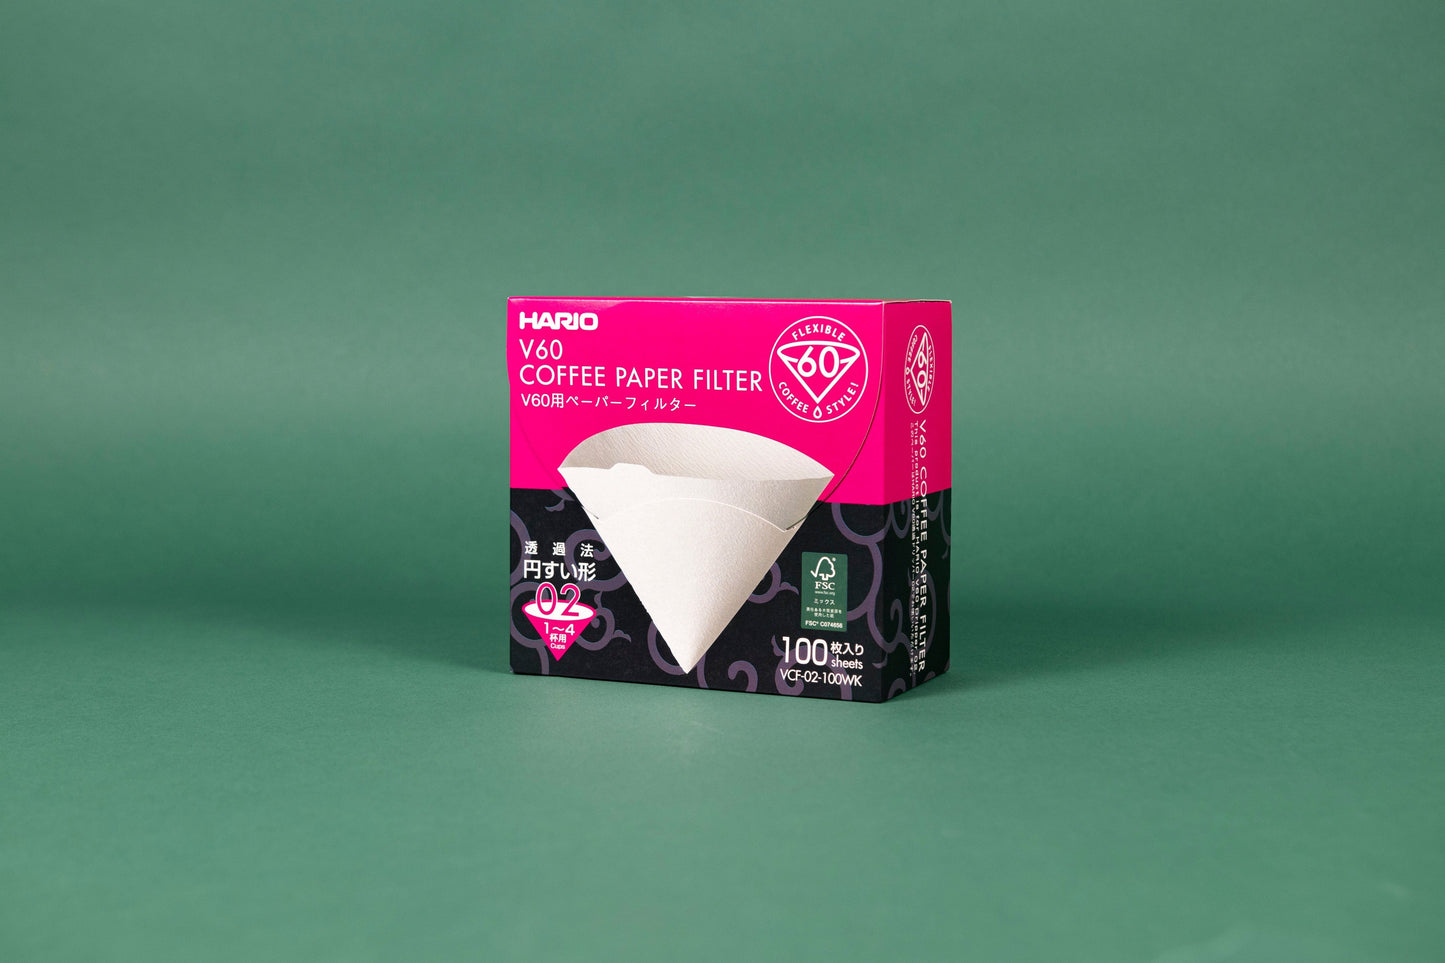 Hario USA Coffee Filters White / 100ct (Boxed, Tabbed) / 02 V60 Paper Filter for 02 Size Dripper